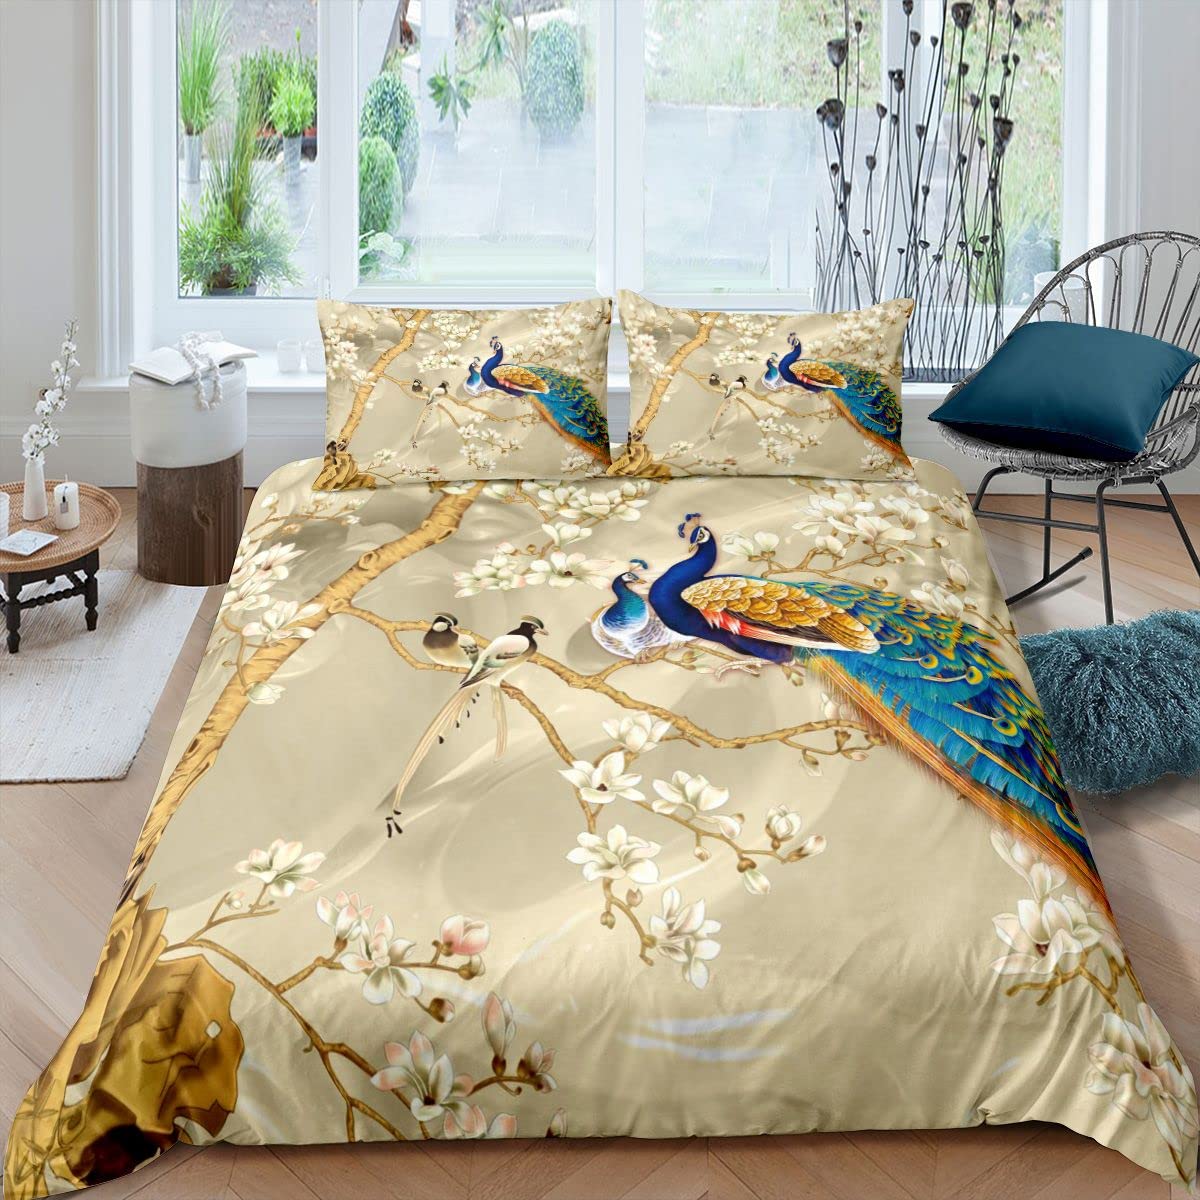 Paon style duvet cover